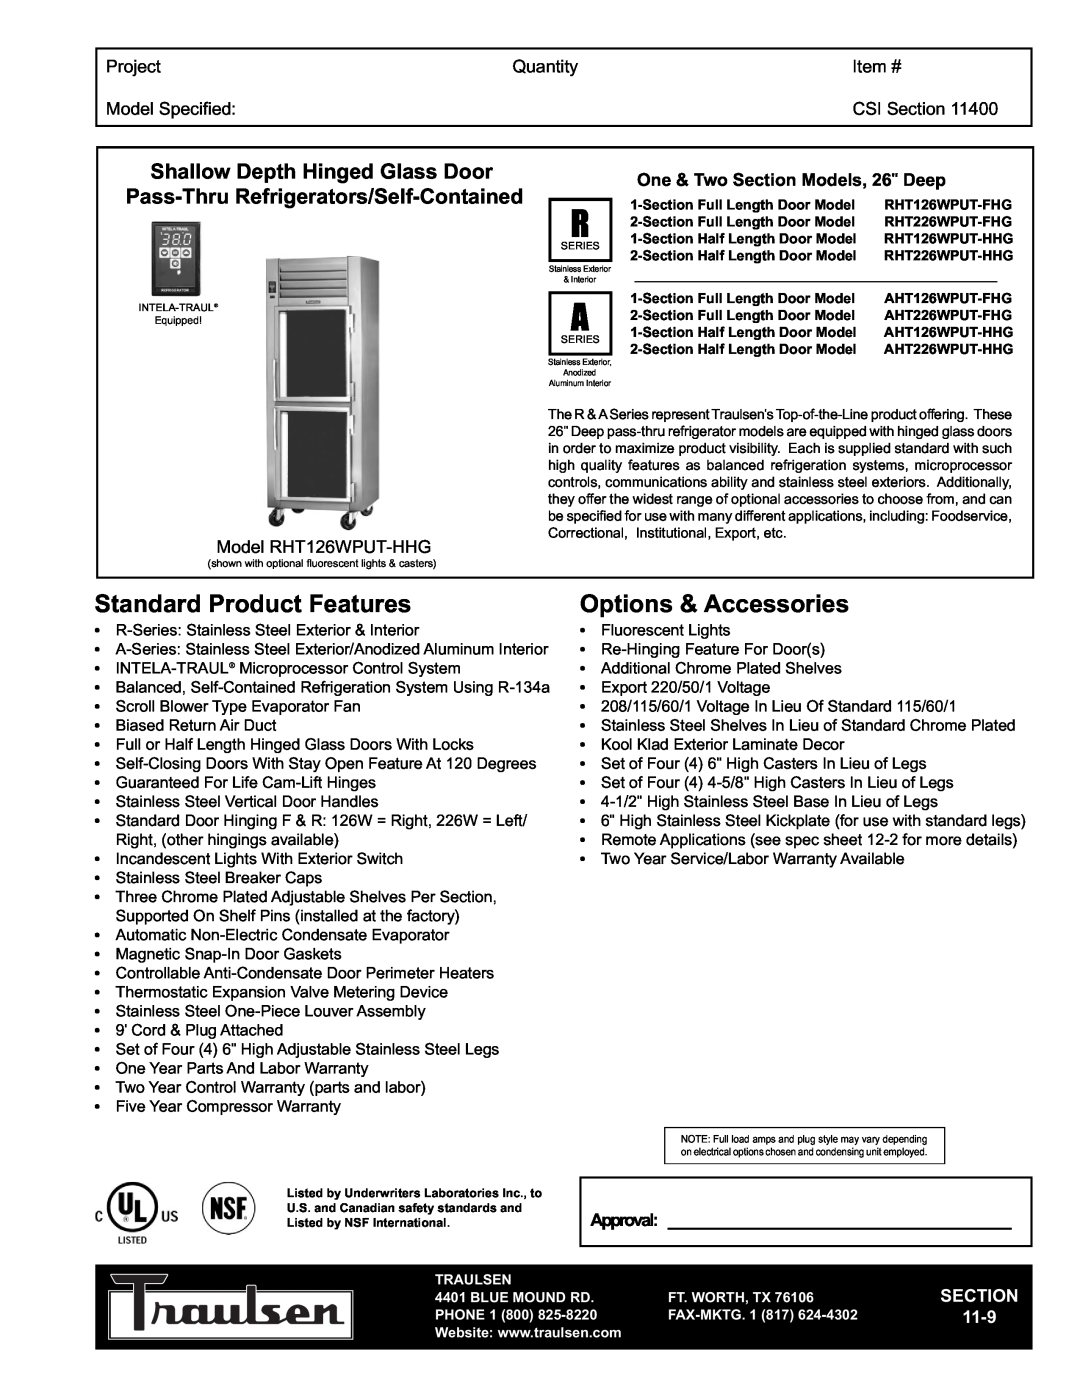 Traulsen RHT126WPUT-HHG warranty Pass-Thru Refrigerators/Self-Contained, Project, Quantity, Item #, Model Specified, 11-9 